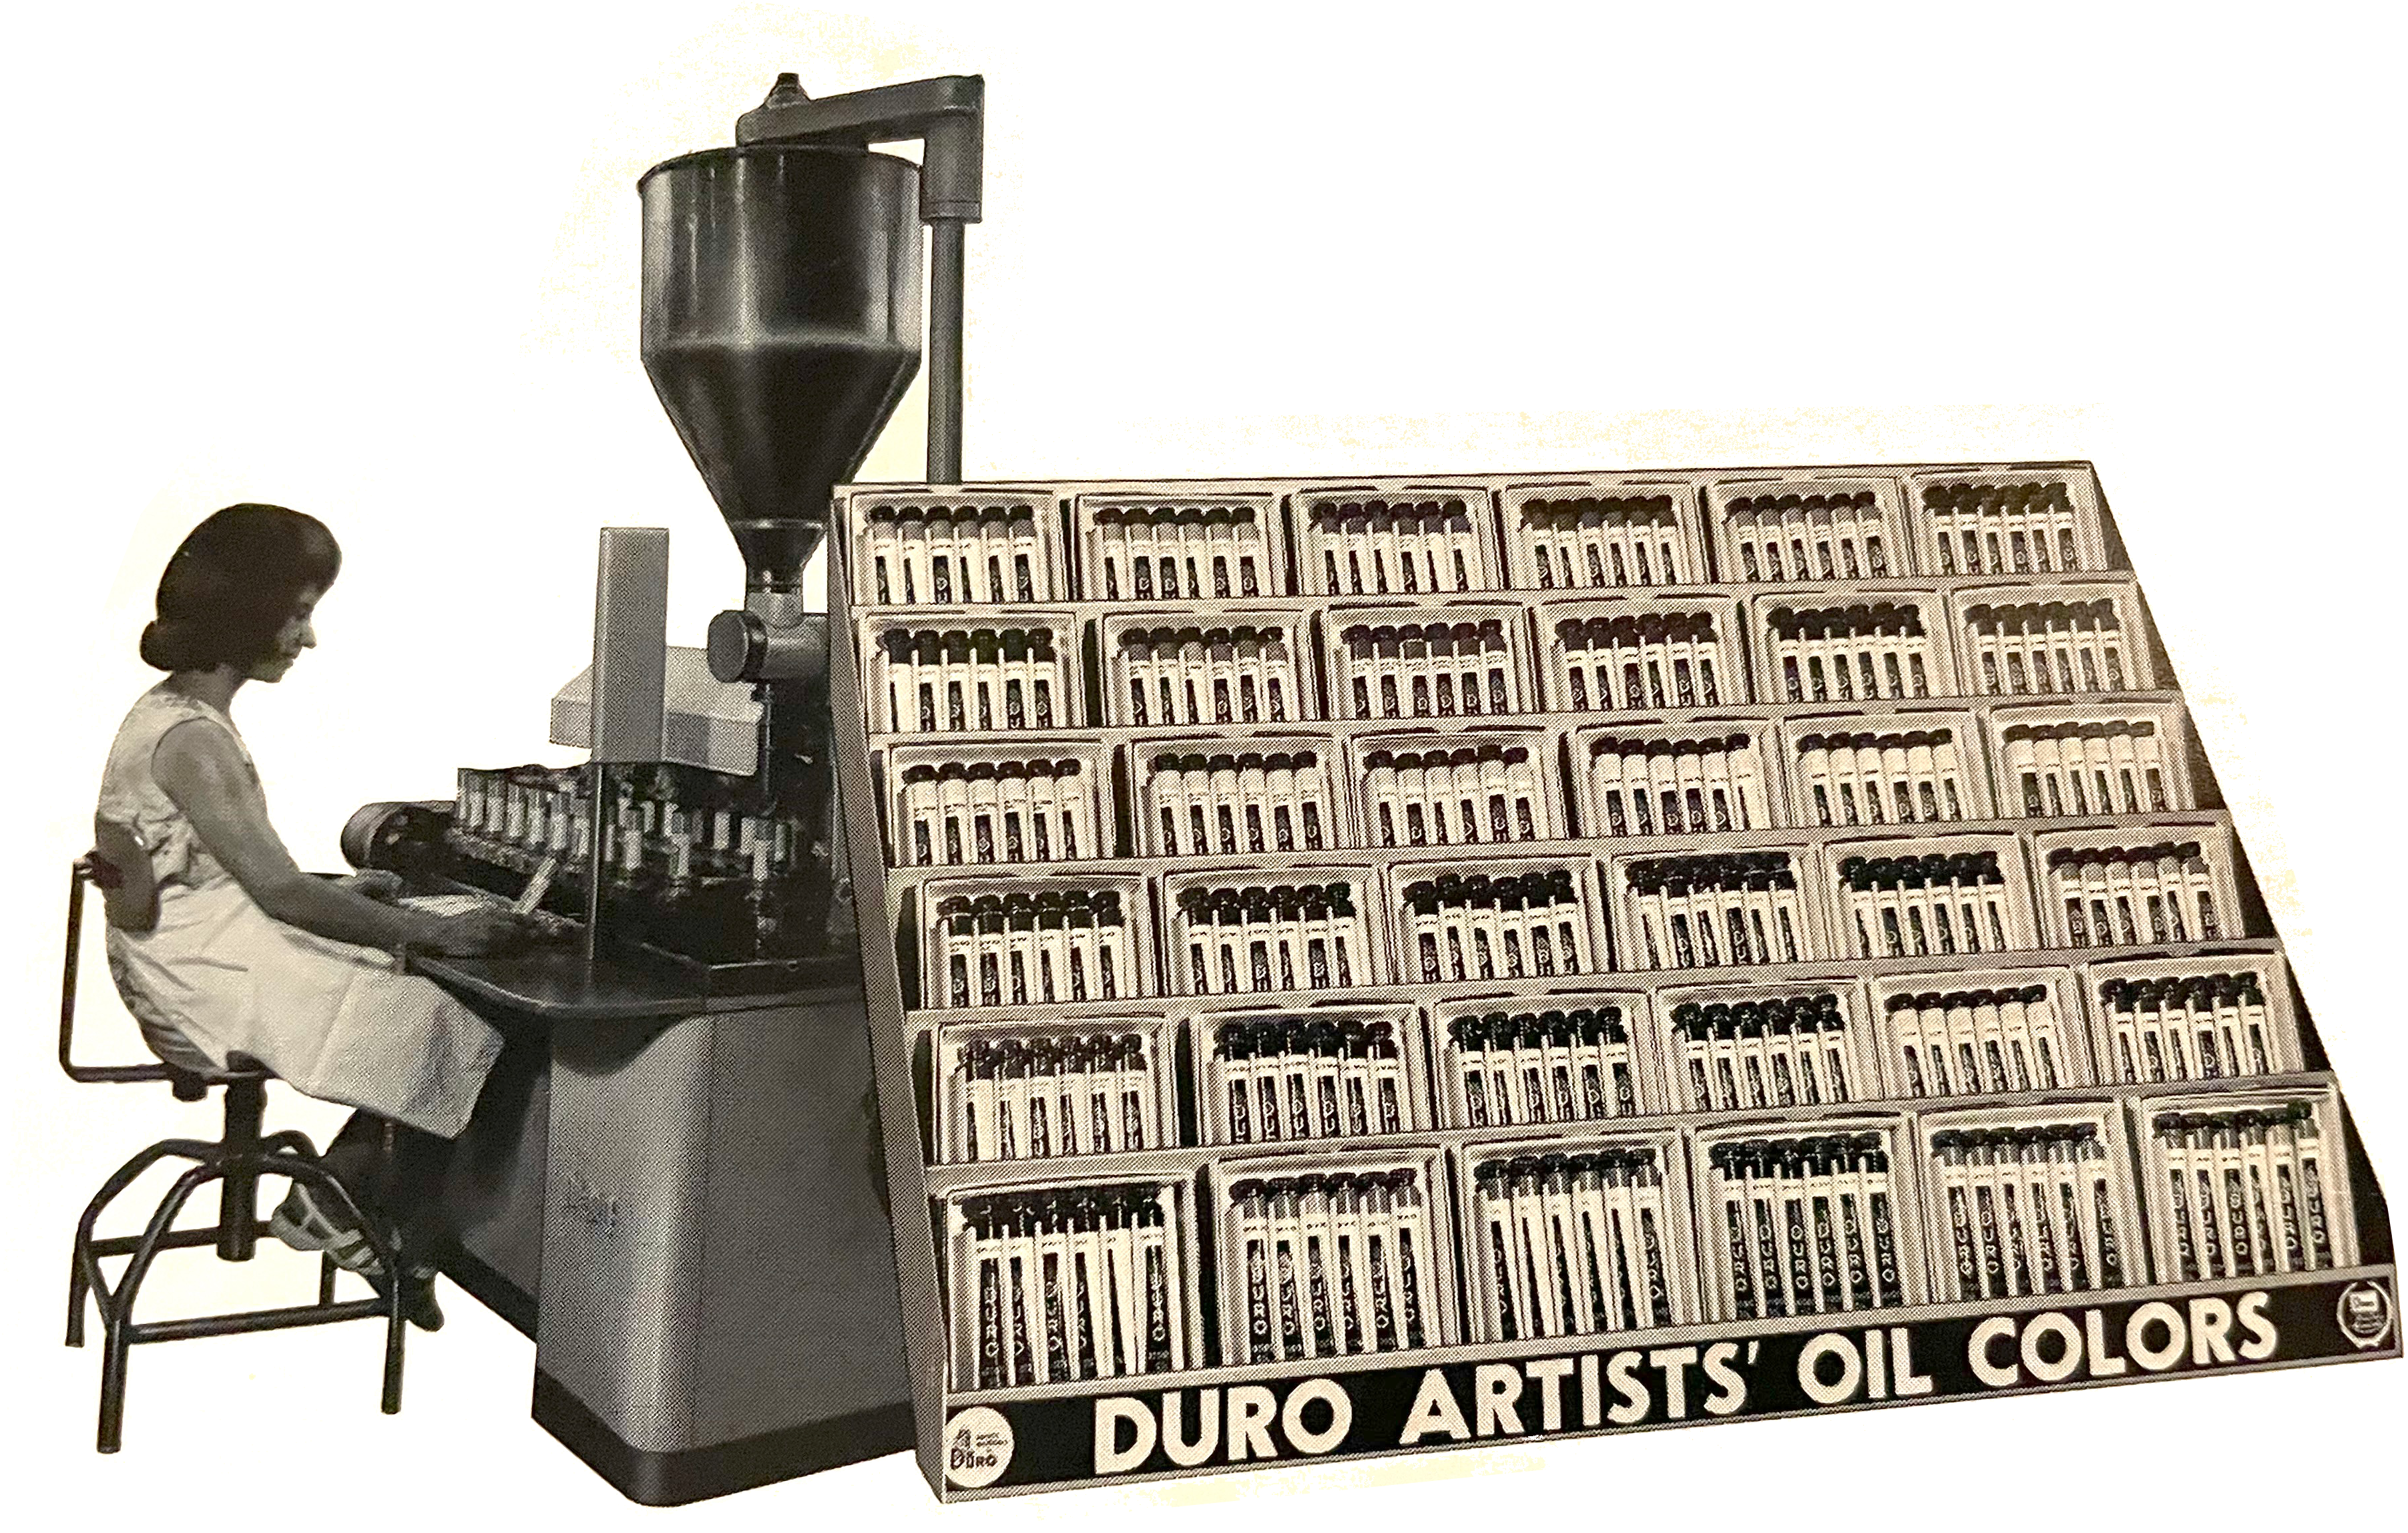 Duro Decal Company, est. 1938 - Made-in-Chicago Museum